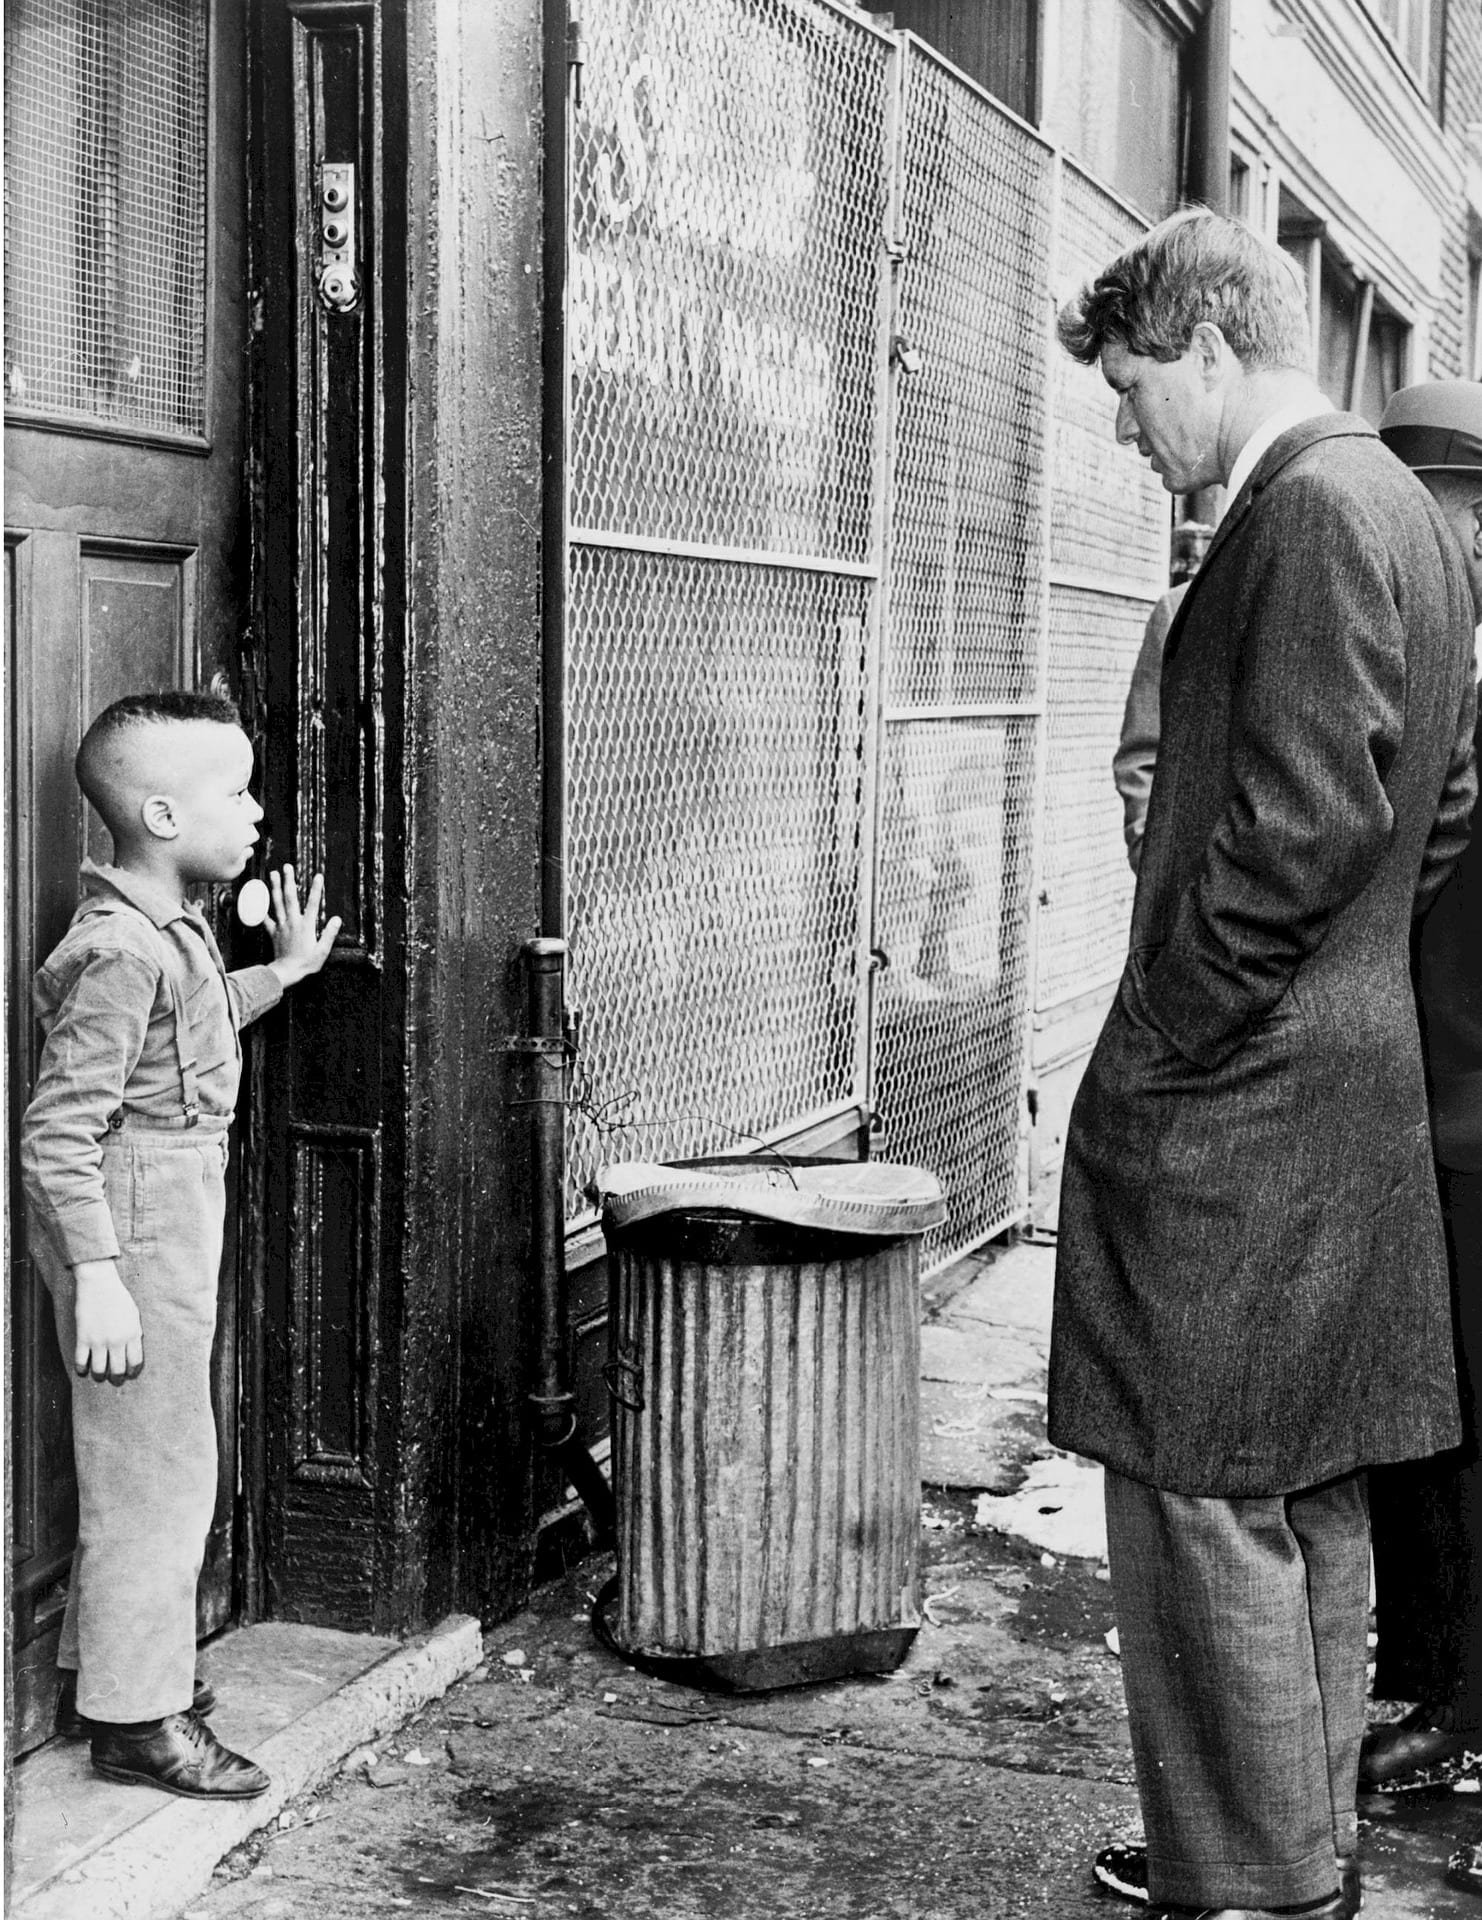 Robert Kennedy talking to young boy in the street.